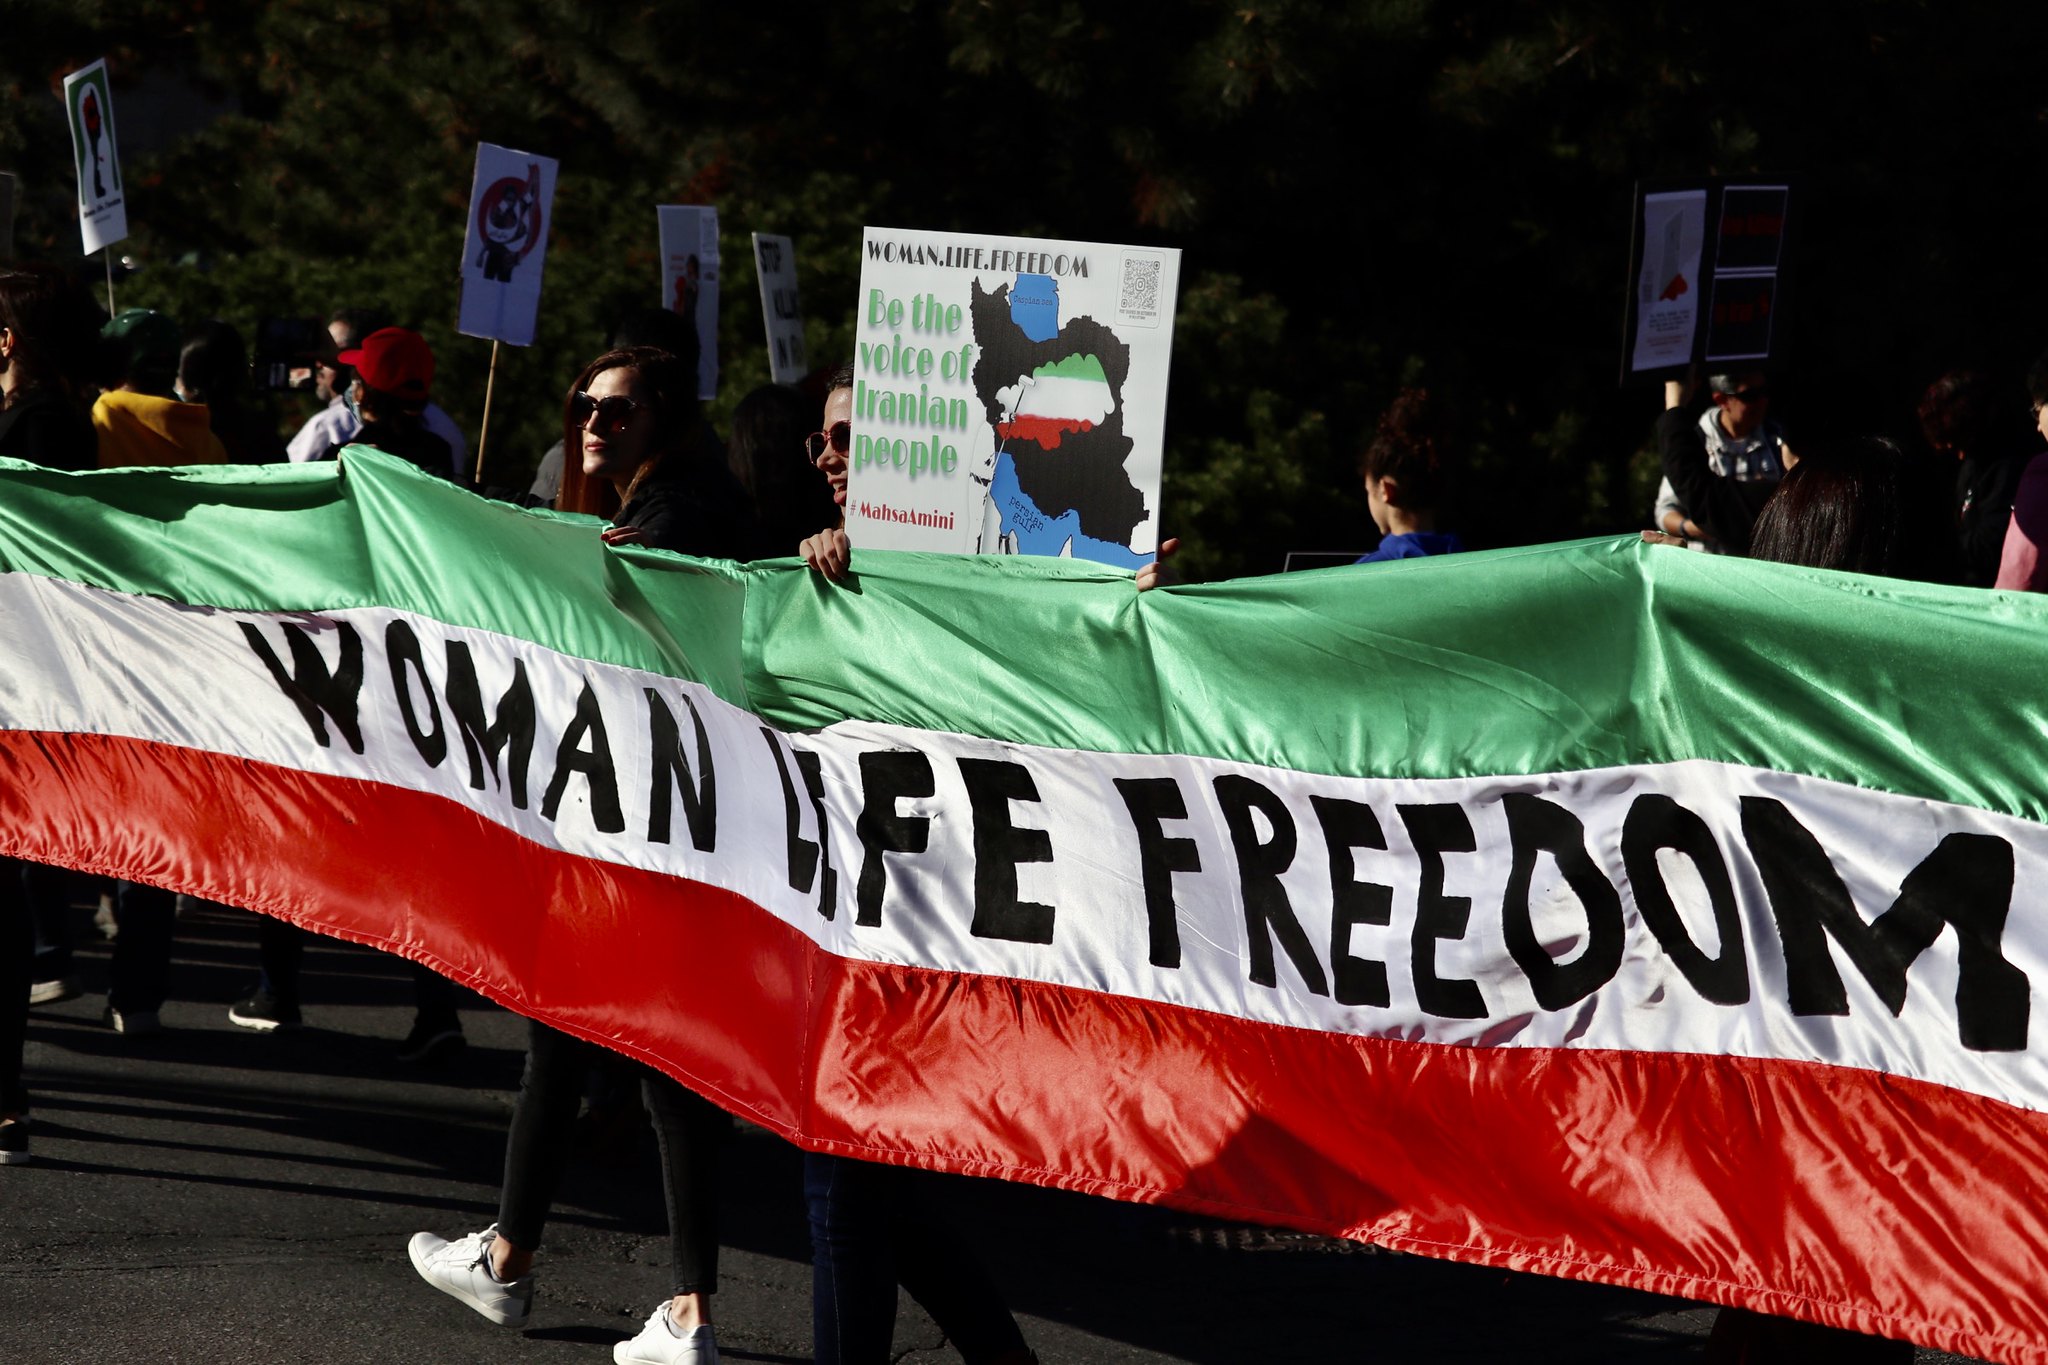 Protesters hold a banner in the colours of the Iranian flag that stretches across the picture with the words 'Women, Life, freedom', in the background people are marching with placards.